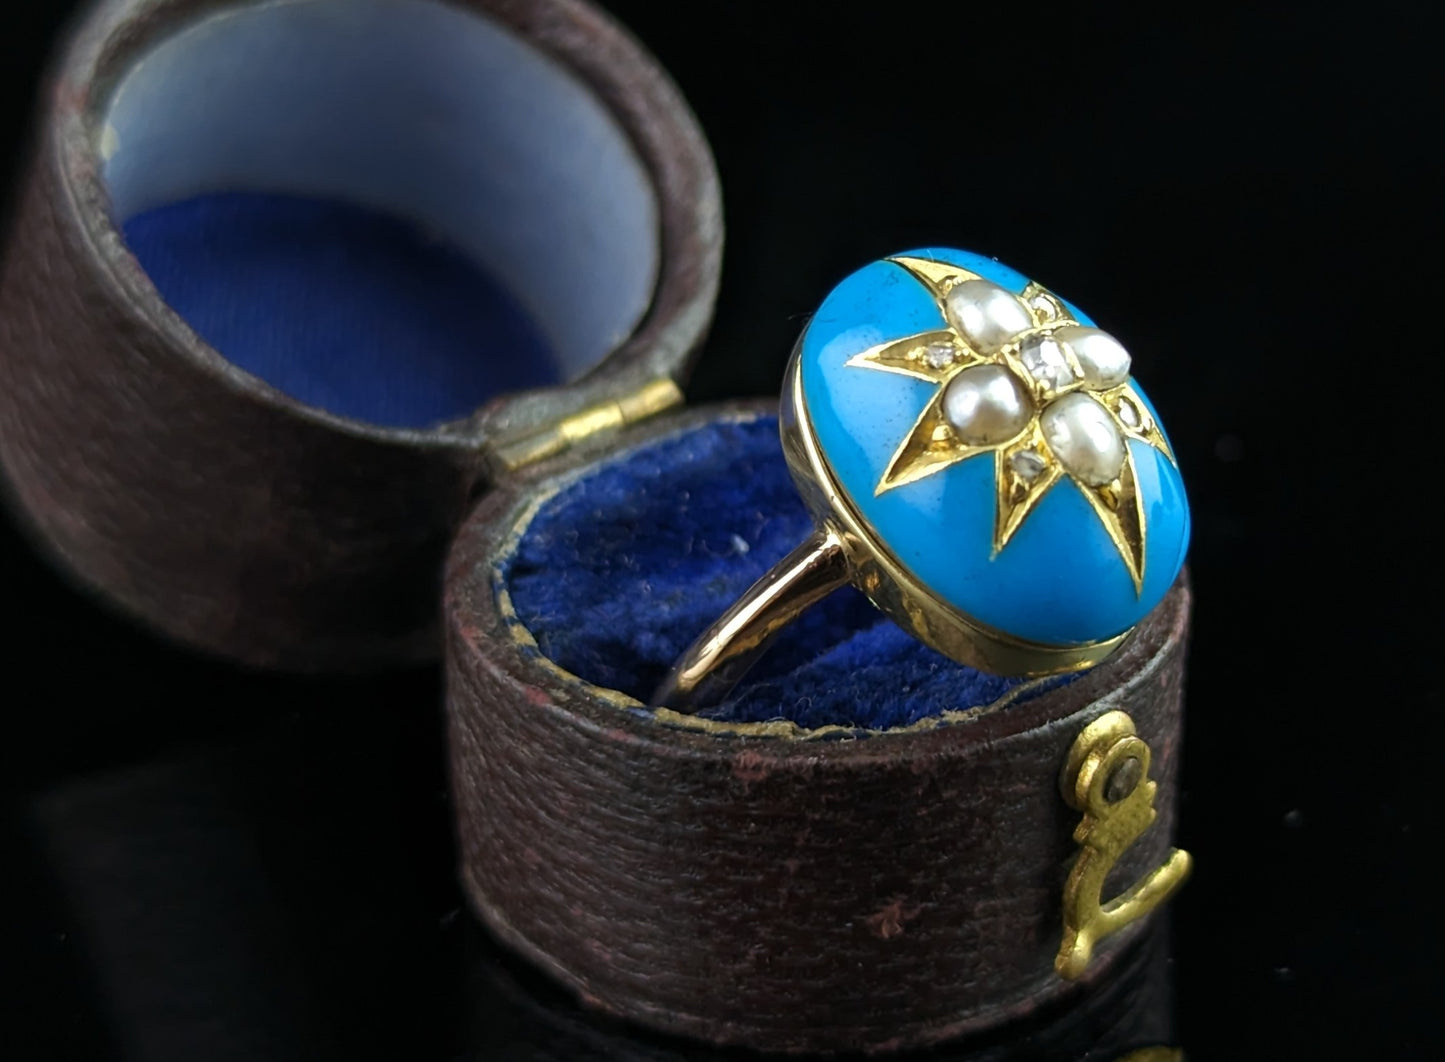 Antique blue enamel star ring, Diamond and pearl, 18ct gold, Victorian